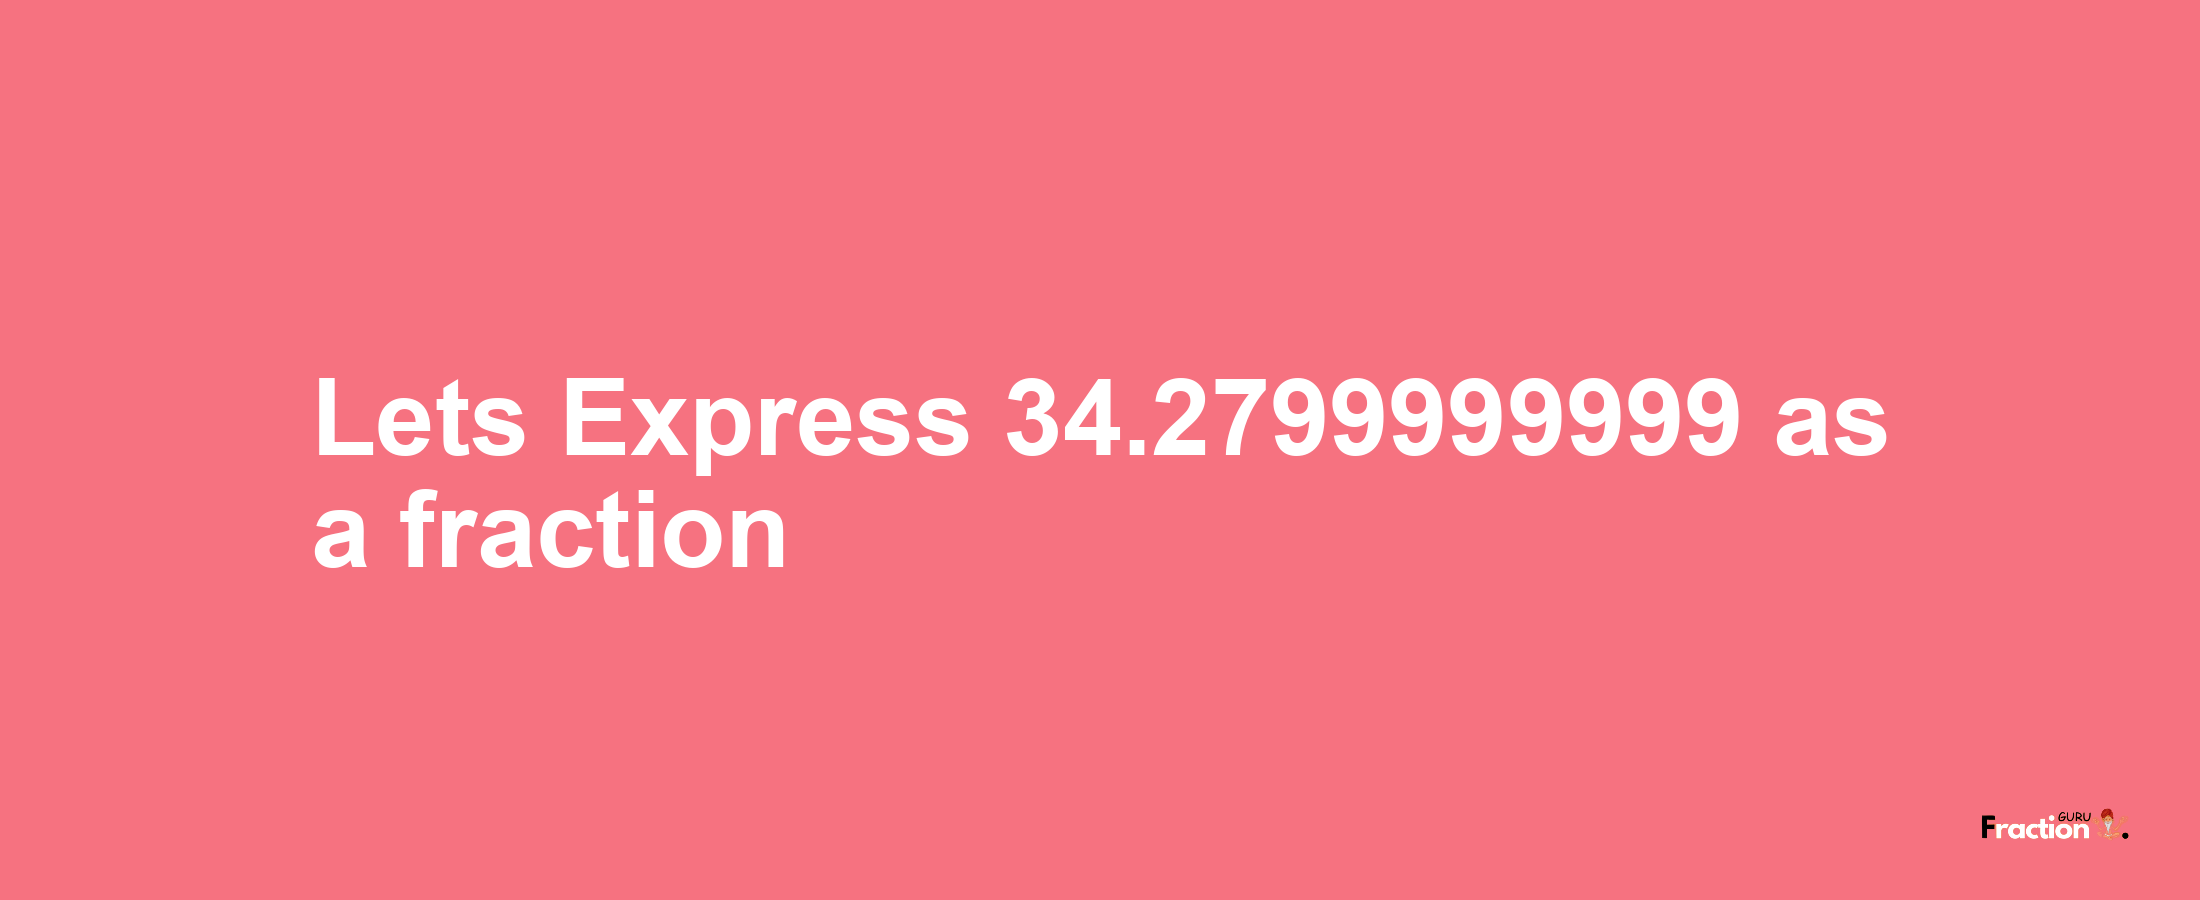 Lets Express 34.2799999999 as afraction